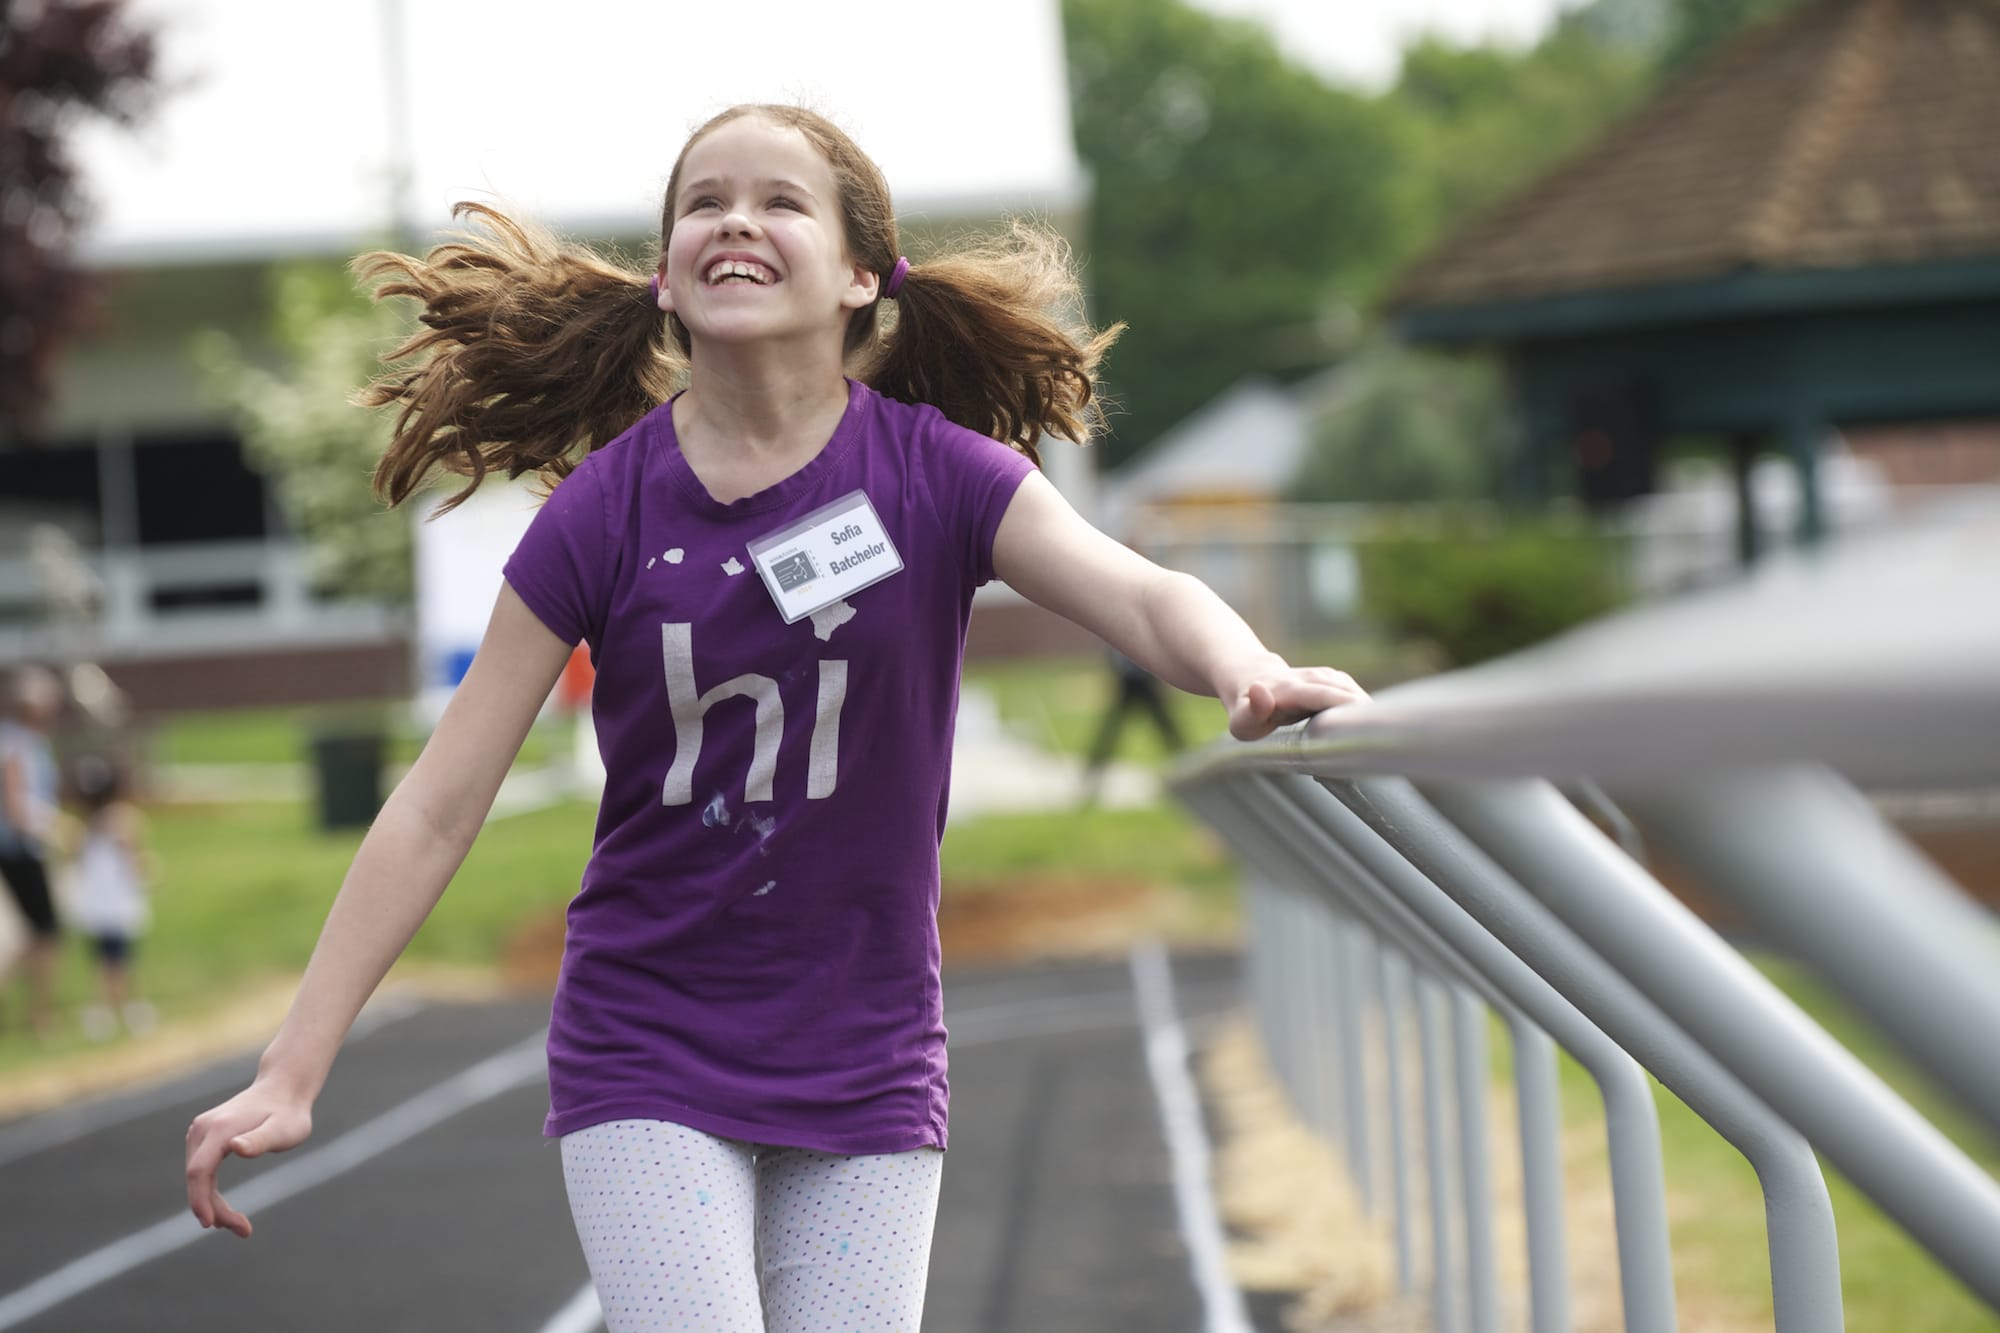 Sofia Batchelor, 10, of Vancouver runs the 100 meters at the Washington State School for the Blind track meet. &quot;Sometimes I feel like I'm flying.